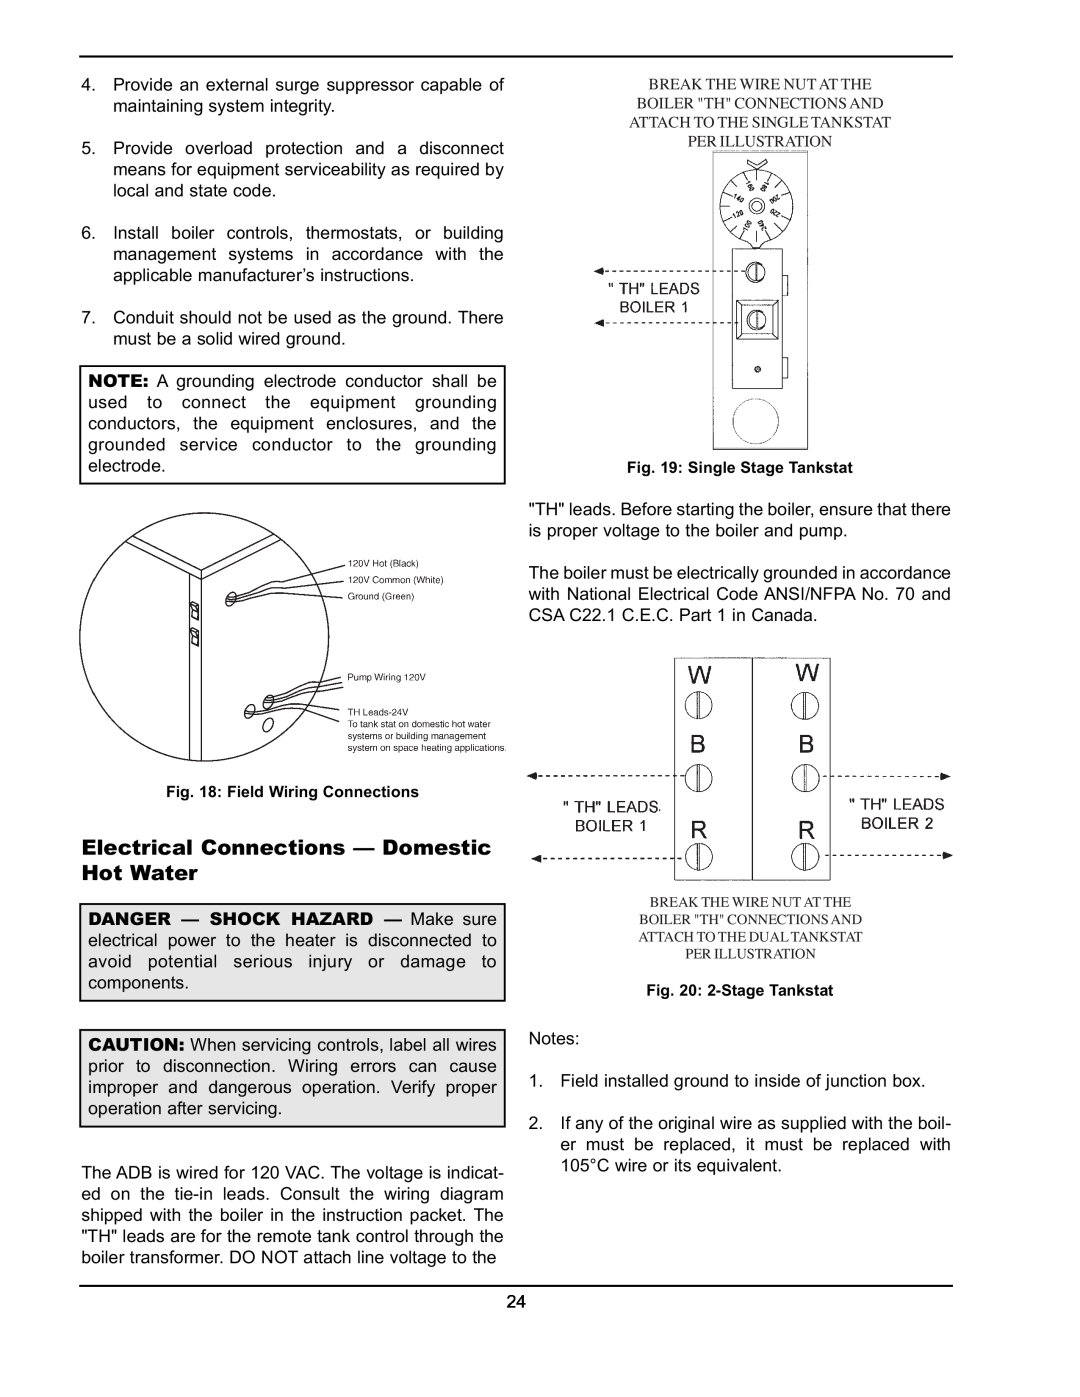 Raypak 751 manual Electrical Connections - Domestic Hot Water 